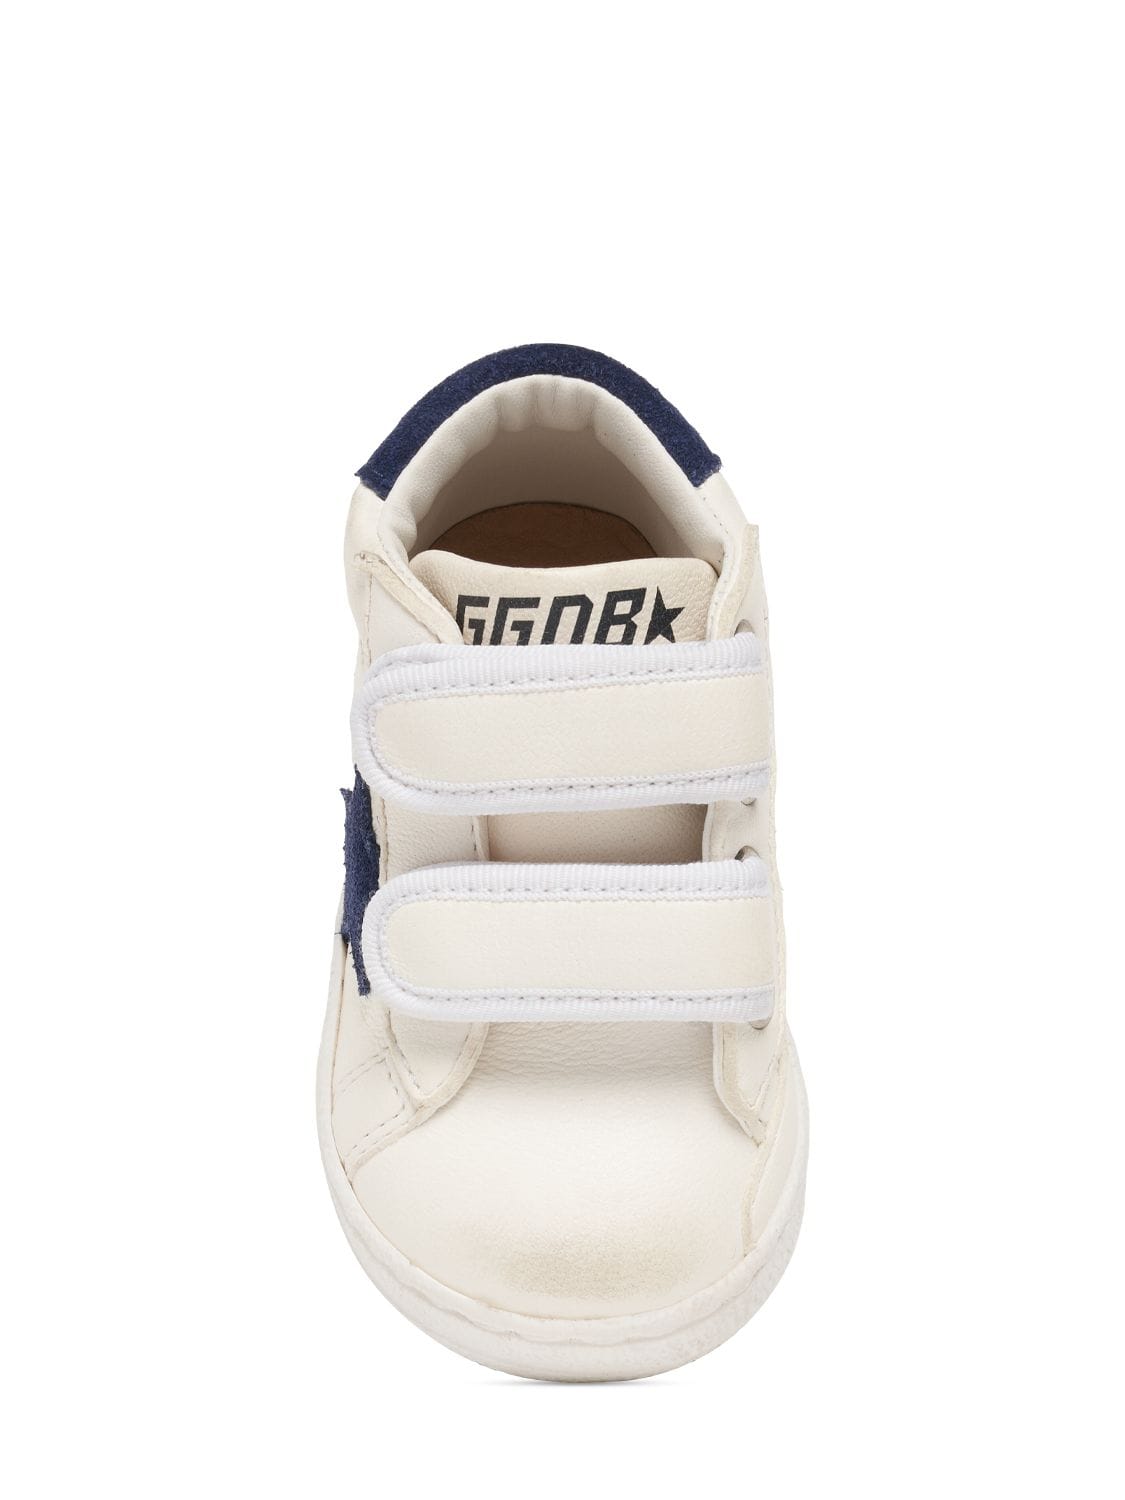 Shop Golden Goose June Leather Strap Sneakers In White,navy